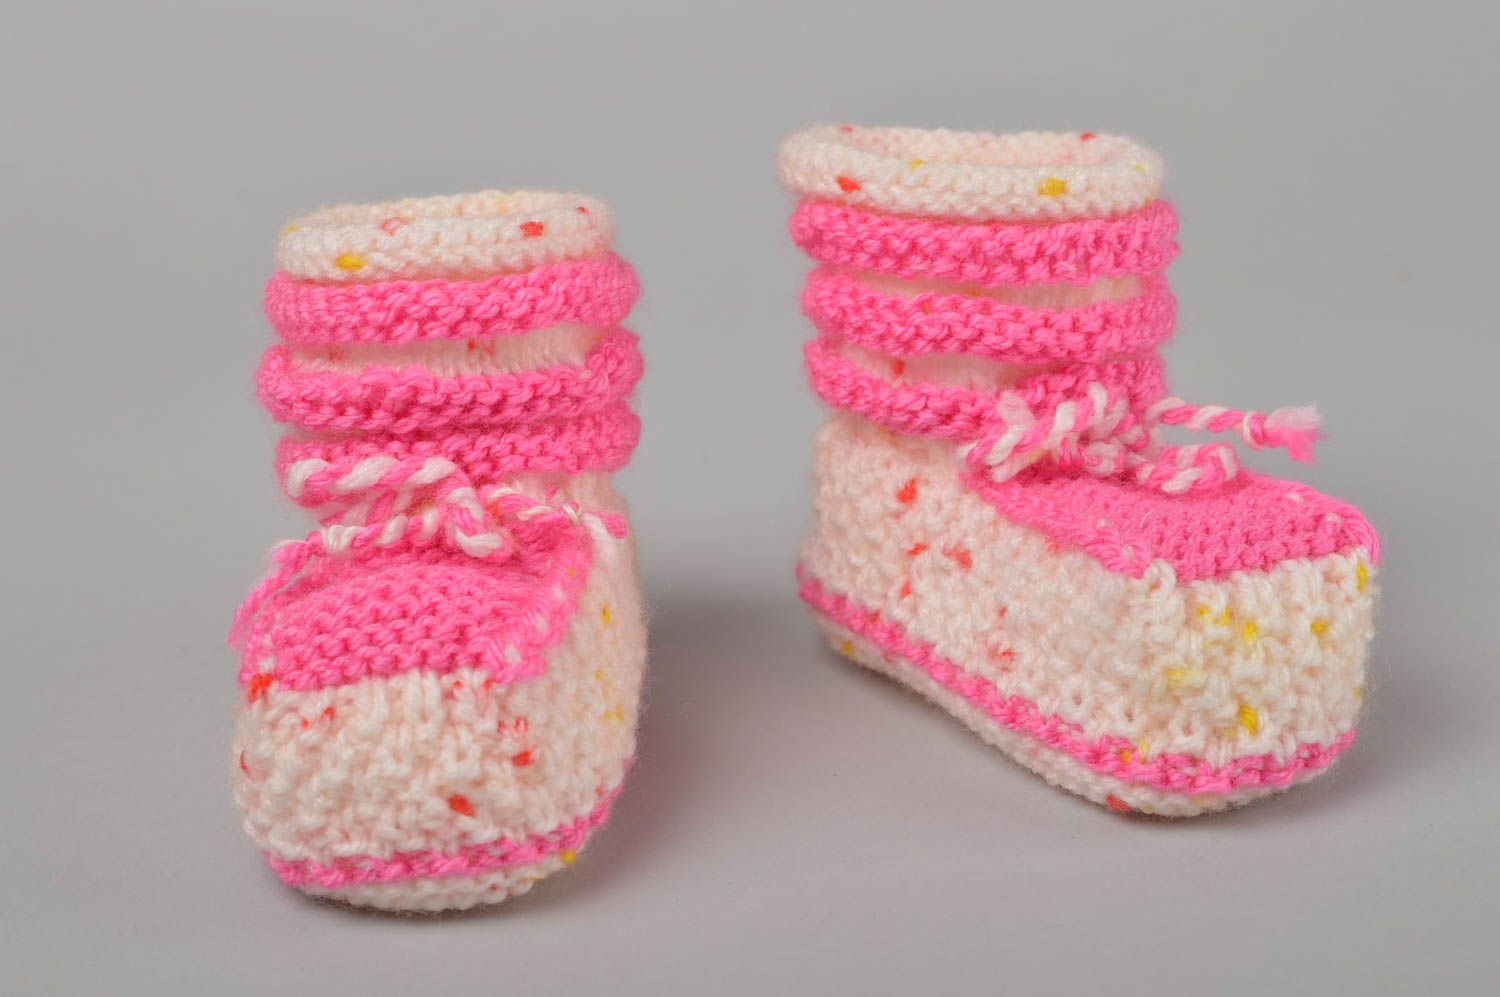 Handmade bootees designer bootees baby bootees crochet bootees warm bootees photo 1